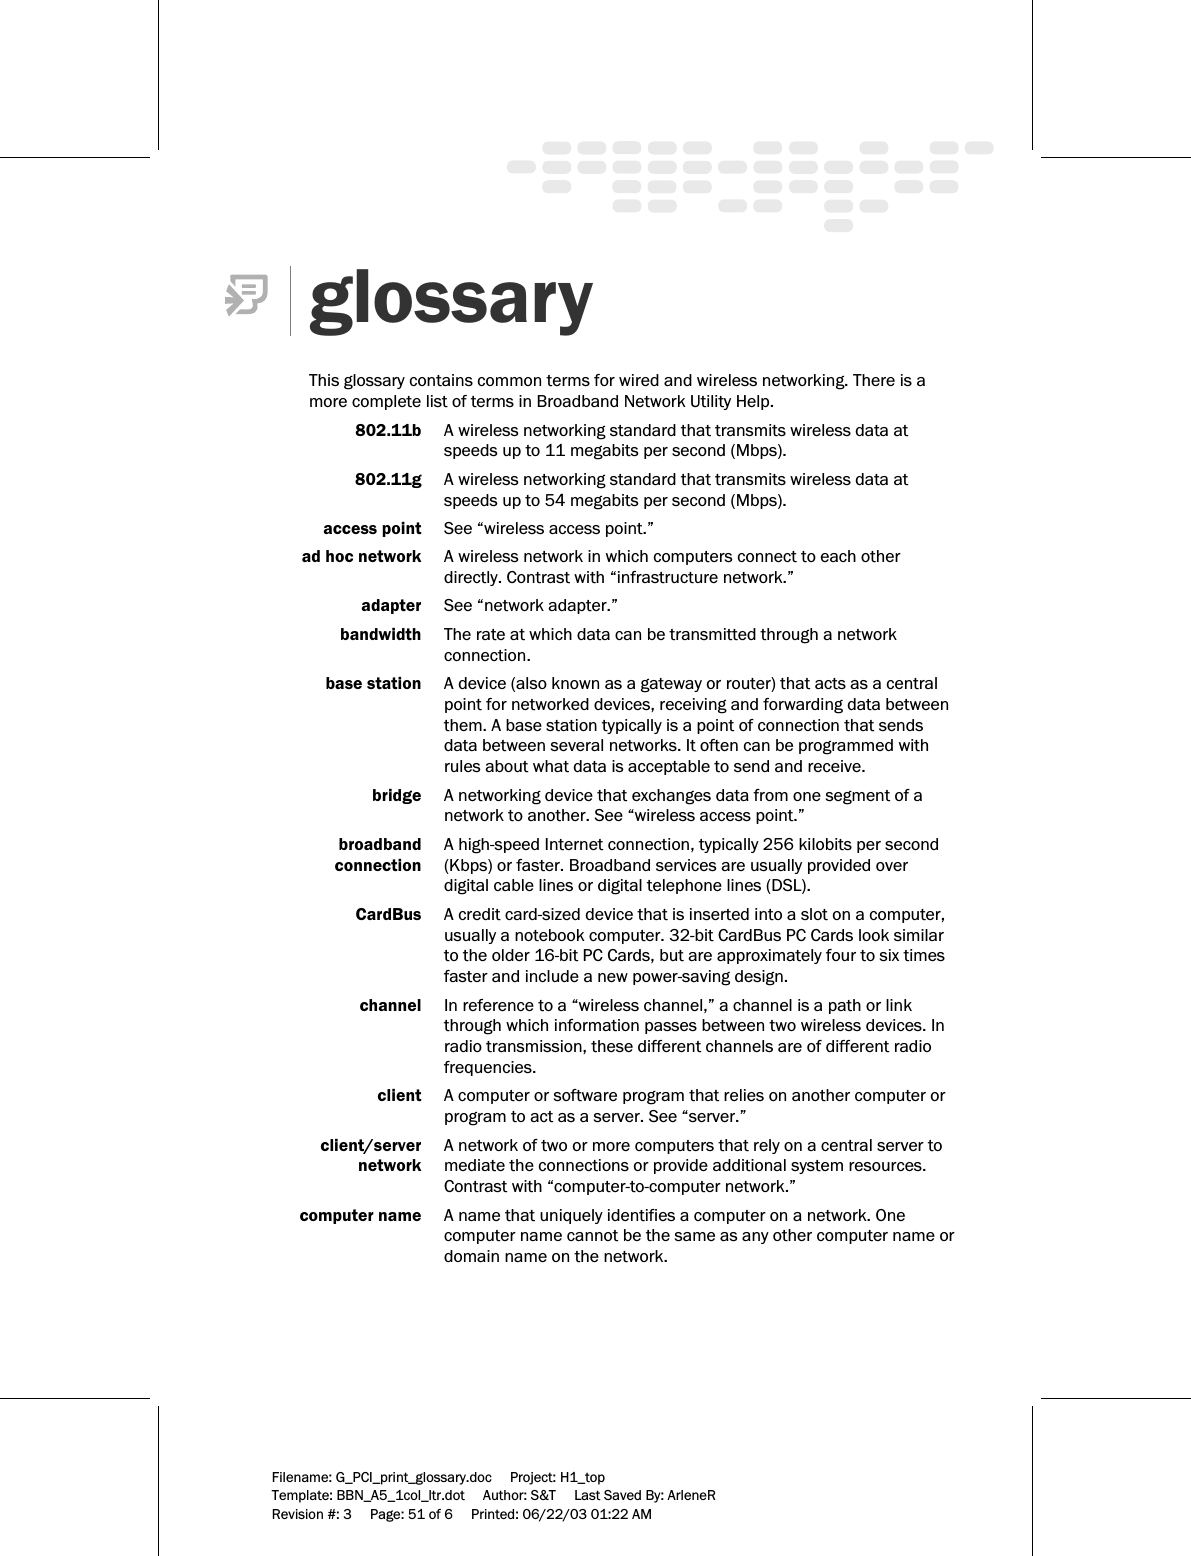     Filename: G_PCI_print_glossary.doc     Project: H1_top    Template: BBN_A5_1col_ltr.dot     Author: S&amp;T     Last Saved By: ArleneR Revision #: 3     Page: 51 of 6     Printed: 06/22/03 01:22 AM   glossary  This glossary contains common terms for wired and wireless networking. There is a more complete list of terms in Broadband Network Utility Help.    802.11b  A wireless networking standard that transmits wireless data at speeds up to 11 megabits per second (Mbps).   802.11g  A wireless networking standard that transmits wireless data at speeds up to 54 megabits per second (Mbps).   access point  See “wireless access point.”   ad hoc network  A wireless network in which computers connect to each other directly. Contrast with “infrastructure network.”  adapter  See “network adapter.”     bandwidth  The rate at which data can be transmitted through a network connection.   base station  A device (also known as a gateway or router) that acts as a central point for networked devices, receiving and forwarding data between them. A base station typically is a point of connection that sends data between several networks. It often can be programmed with rules about what data is acceptable to send and receive.  bridge  A networking device that exchanges data from one segment of a network to another. See “wireless access point.”  broadband   A high-speed Internet connection, typically 256 kilobits per second   connection  (Kbps) or faster. Broadband services are usually provided over digital cable lines or digital telephone lines (DSL).   CardBus  A credit card-sized device that is inserted into a slot on a computer, usually a notebook computer. 32-bit CardBus PC Cards look similar to the older 16-bit PC Cards, but are approximately four to six times faster and include a new power-saving design.    channel  In reference to a “wireless channel,” a channel is a path or link through which information passes between two wireless devices. In radio transmission, these different channels are of different radio frequencies.   client  A computer or software program that relies on another computer or program to act as a server. See “server.”  client/server   A network of two or more computers that rely on a central server to   network  mediate the connections or provide additional system resources. Contrast with “computer-to-computer network.”  computer name  A name that uniquely identifies a computer on a network. One computer name cannot be the same as any other computer name or domain name on the network.  